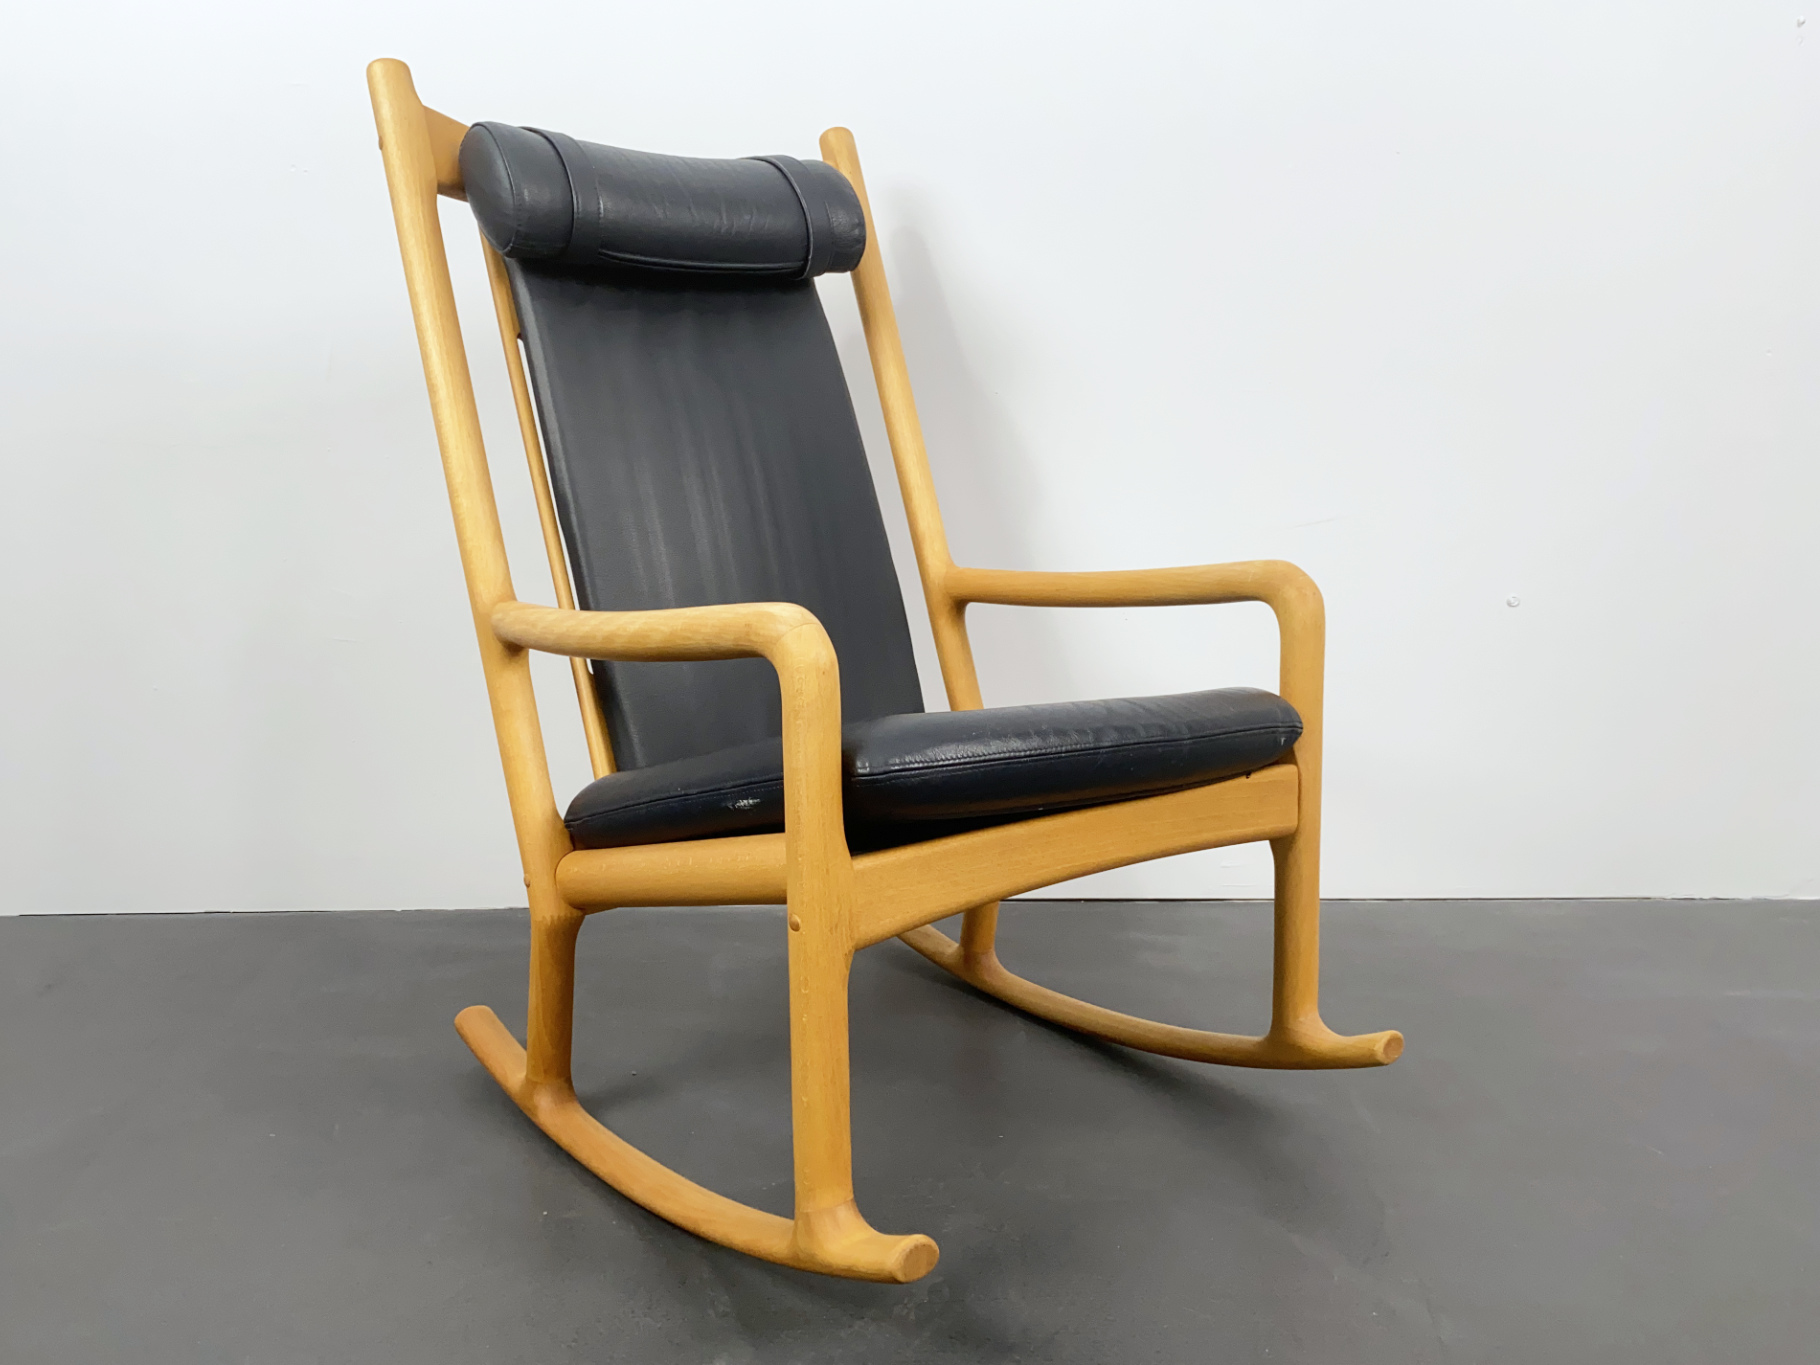 Beech Wood Rocking Chair with Leather Upholstery by Hans Olsen for Juul Kristensen, Denmark, 70s